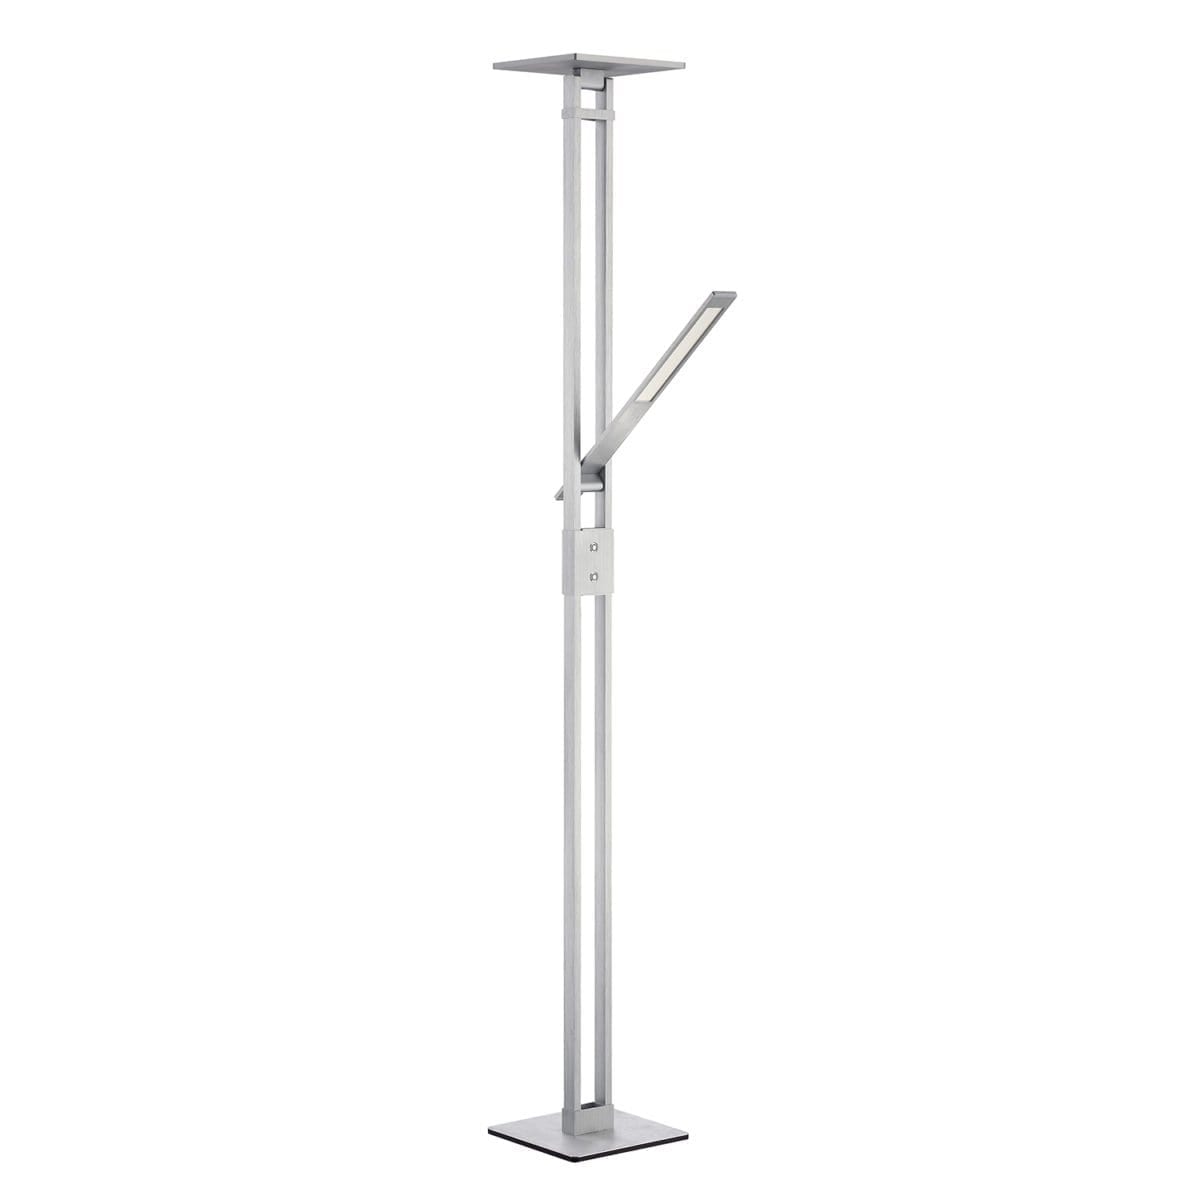 147 TC 5001 BAL
LED Torchiere in Brushed Aluminum
with reading light
Regular Price $715.99
Sale Price $501.99